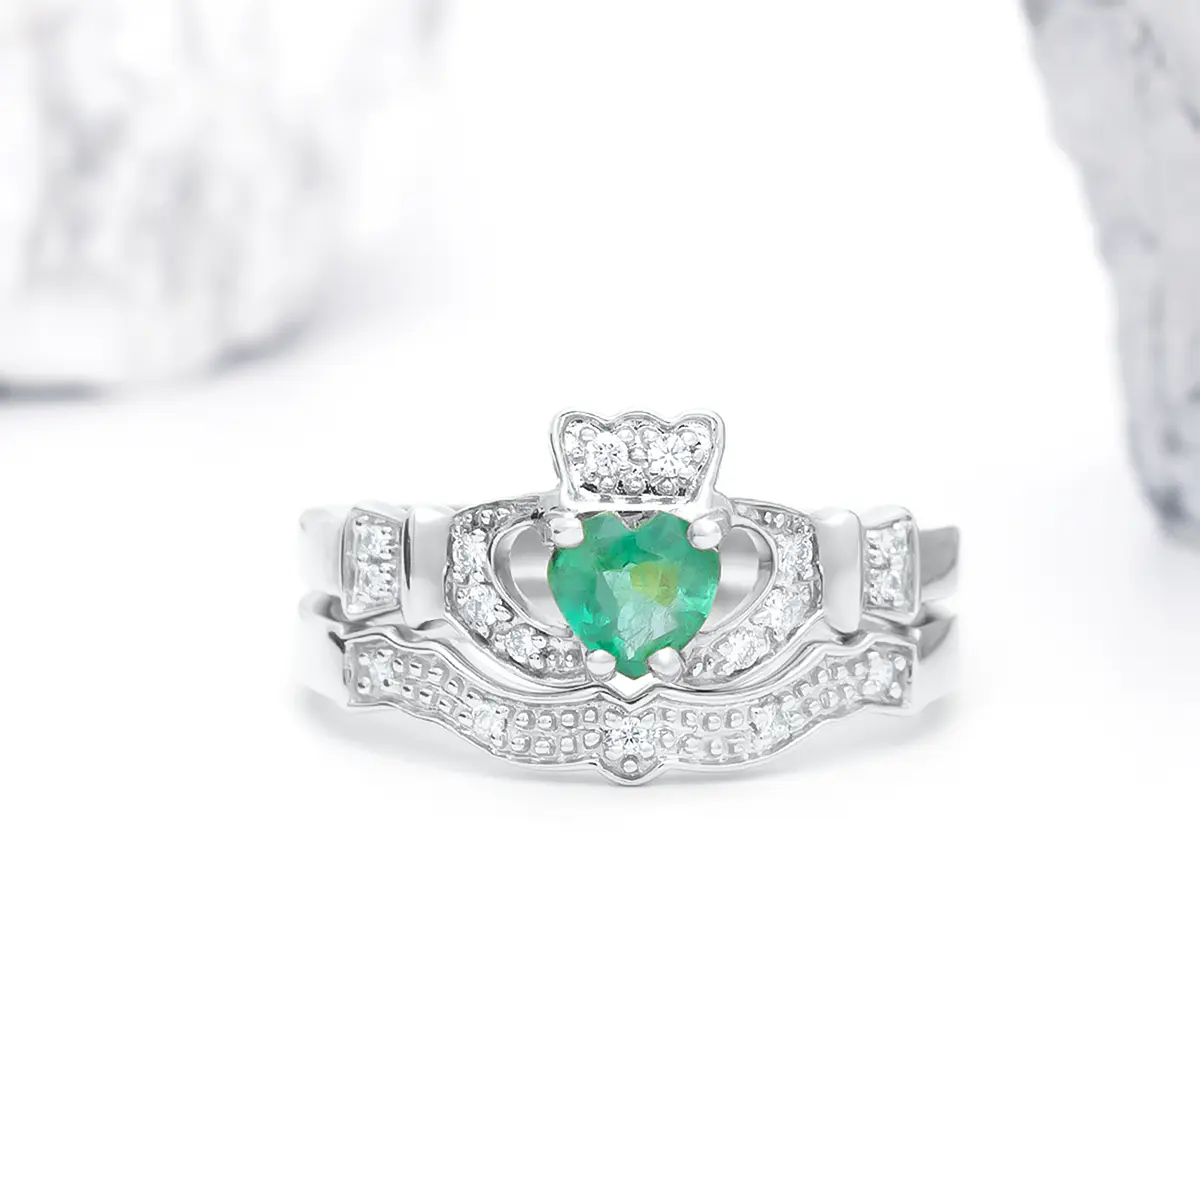 White Gold Emerald And Diamond Claddagh Engagement Ring Set